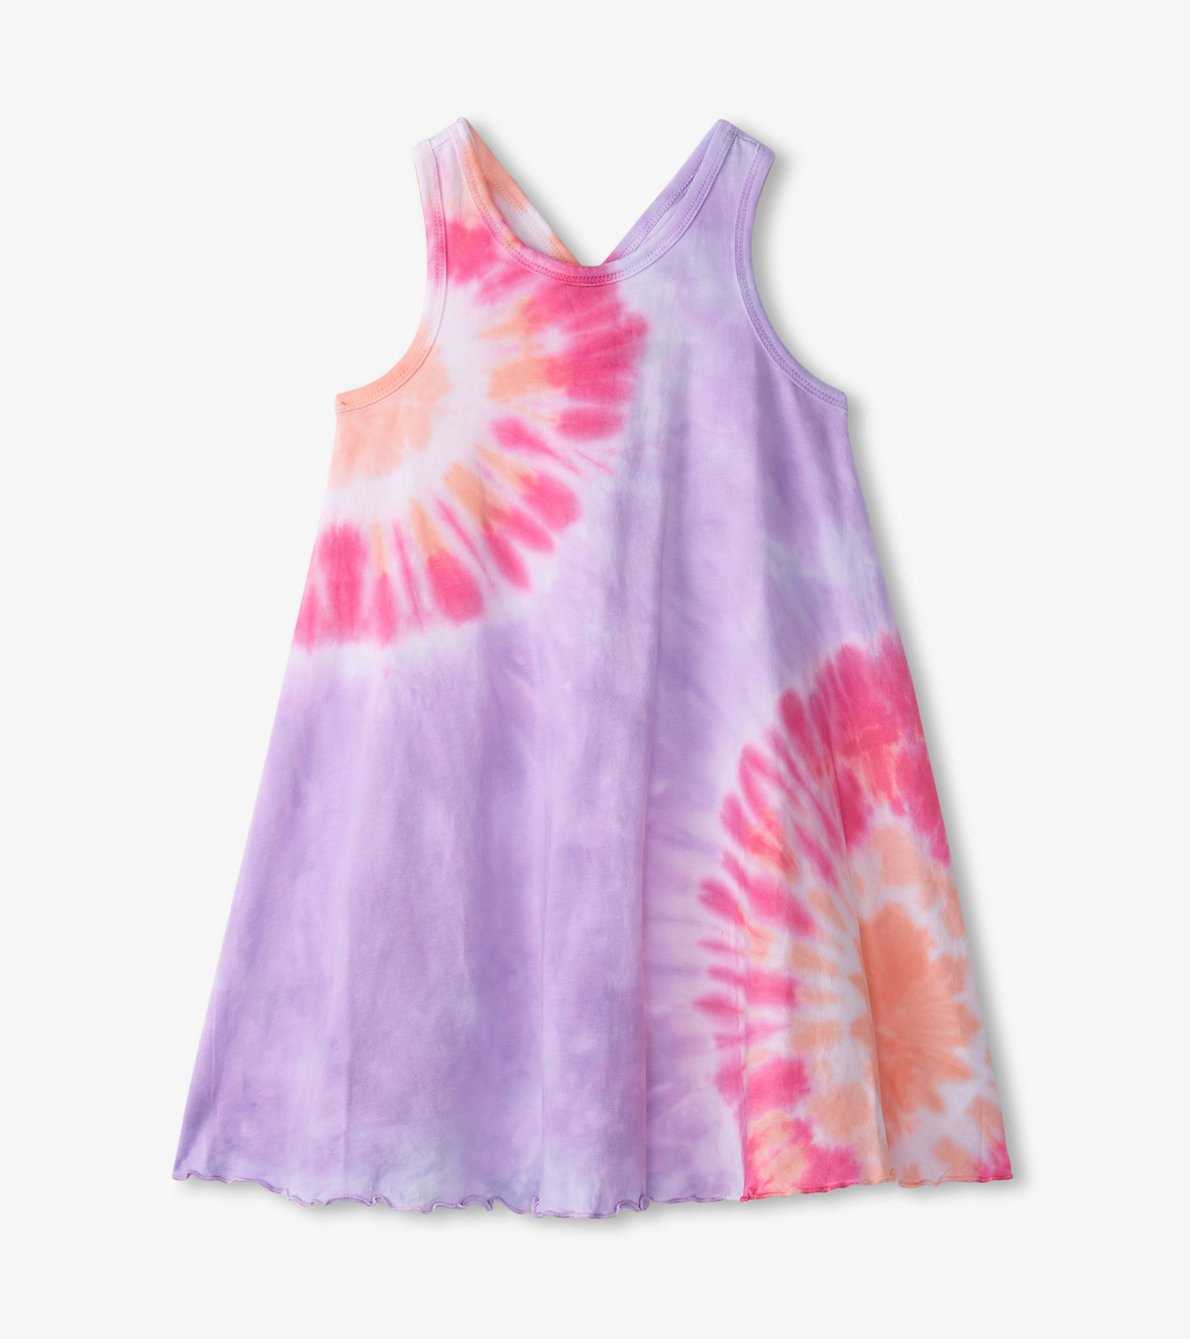 View larger image of Girls Summer Sea Trapeze Dress